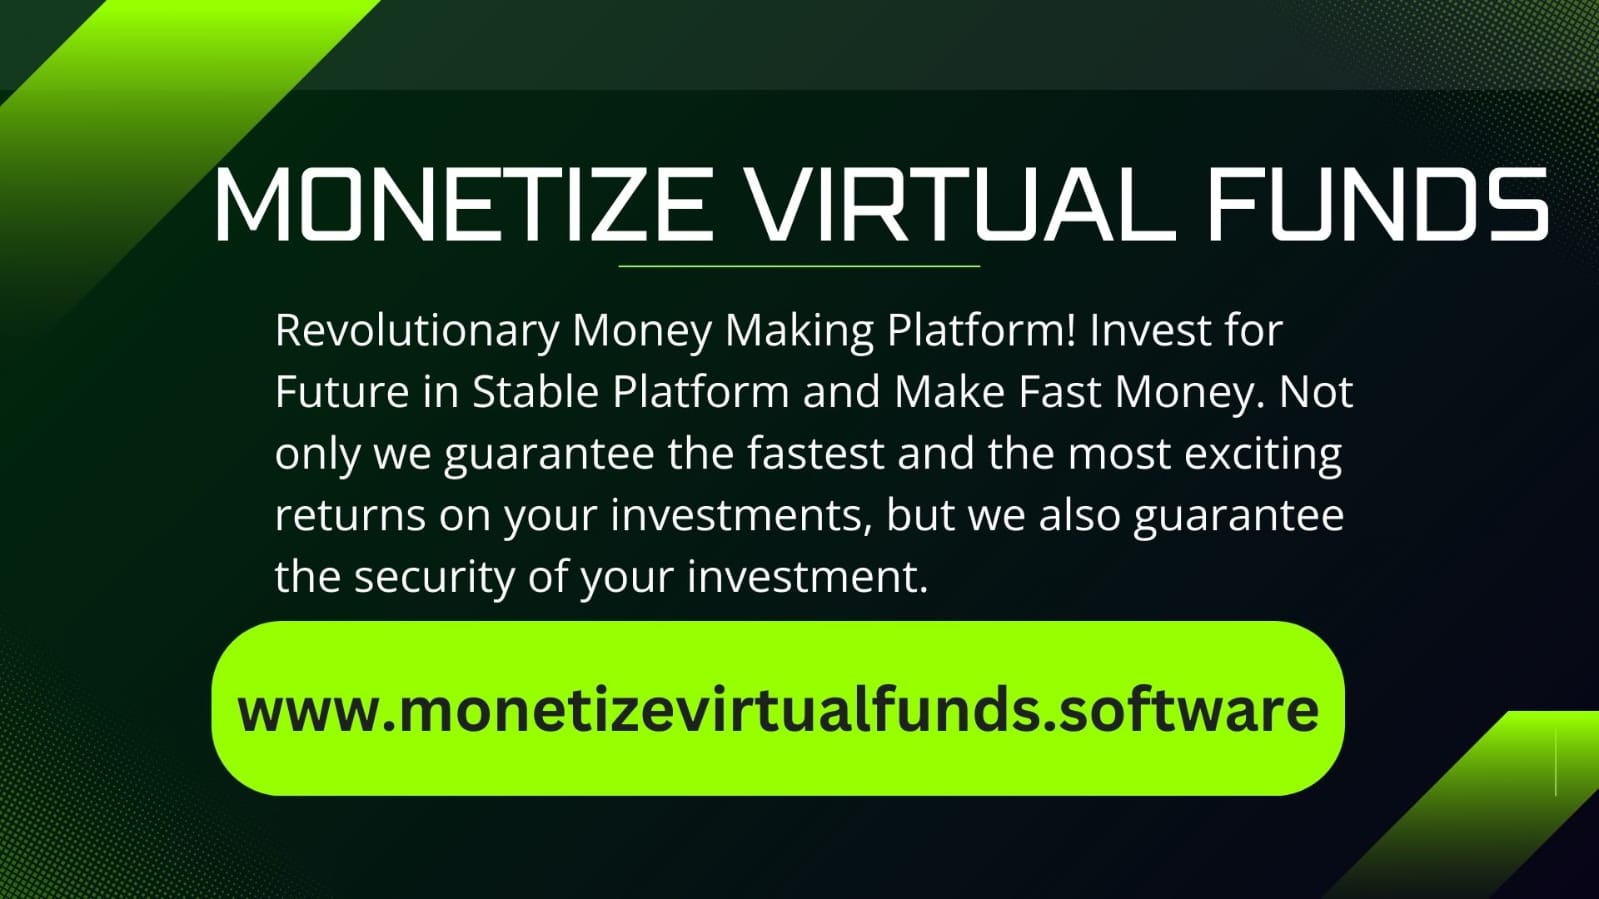 revolutionary-money-making-with-monetize-virtual-funds